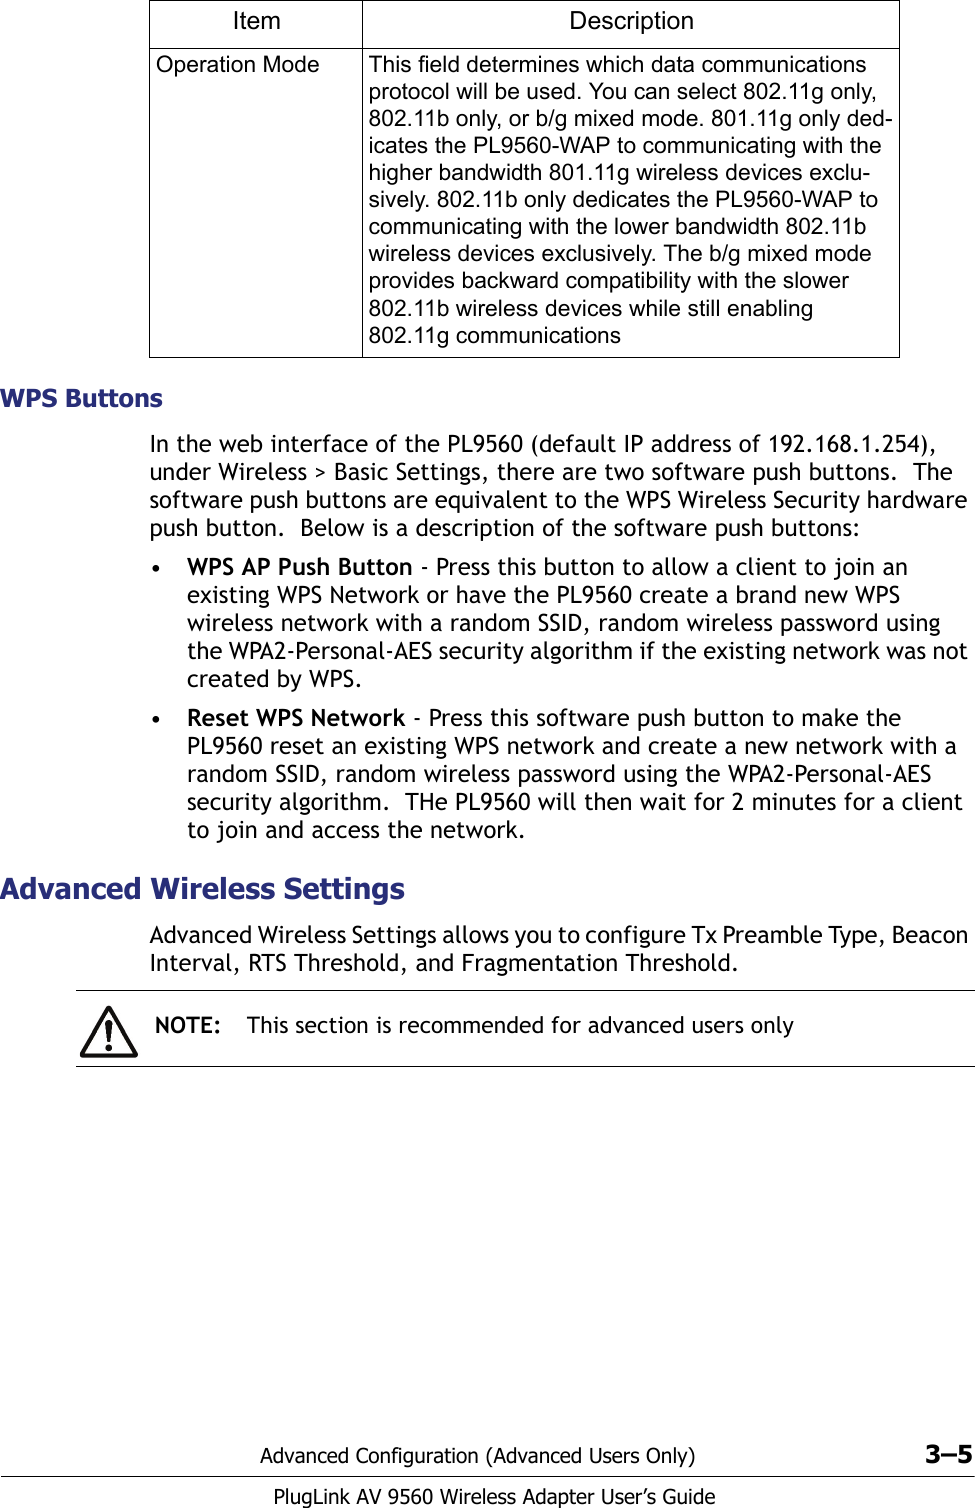 Advanced Configuration (Advanced Users Only) 3–5PlugLink AV 9560 Wireless Adapter User’s GuideWPS ButtonsIn the web interface of the PL9560 (default IP address of 192.168.1.254), under Wireless &gt; Basic Settings, there are two software push buttons.  The software push buttons are equivalent to the WPS Wireless Security hardware push button.  Below is a description of the software push buttons:•WPS AP Push Button - Press this button to allow a client to join an existing WPS Network or have the PL9560 create a brand new WPS wireless network with a random SSID, random wireless password using the WPA2-Personal-AES security algorithm if the existing network was not created by WPS. •Reset WPS Network - Press this software push button to make the PL9560 reset an existing WPS network and create a new network with a random SSID, random wireless password using the WPA2-Personal-AES security algorithm.  THe PL9560 will then wait for 2 minutes for a client to join and access the network.Advanced Wireless SettingsAdvanced Wireless Settings allows you to configure Tx Preamble Type, Beacon Interval, RTS Threshold, and Fragmentation Threshold. Operation Mode This field determines which data communications protocol will be used. You can select 802.11g only, 802.11b only, or b/g mixed mode. 801.11g only ded-icates the PL9560-WAP to communicating with the higher bandwidth 801.11g wireless devices exclu-sively. 802.11b only dedicates the PL9560-WAP to communicating with the lower bandwidth 802.11b wireless devices exclusively. The b/g mixed mode provides backward compatibility with the slower 802.11b wireless devices while still enabling 802.11g communicationsItem DescriptionNOTE: This section is recommended for advanced users only